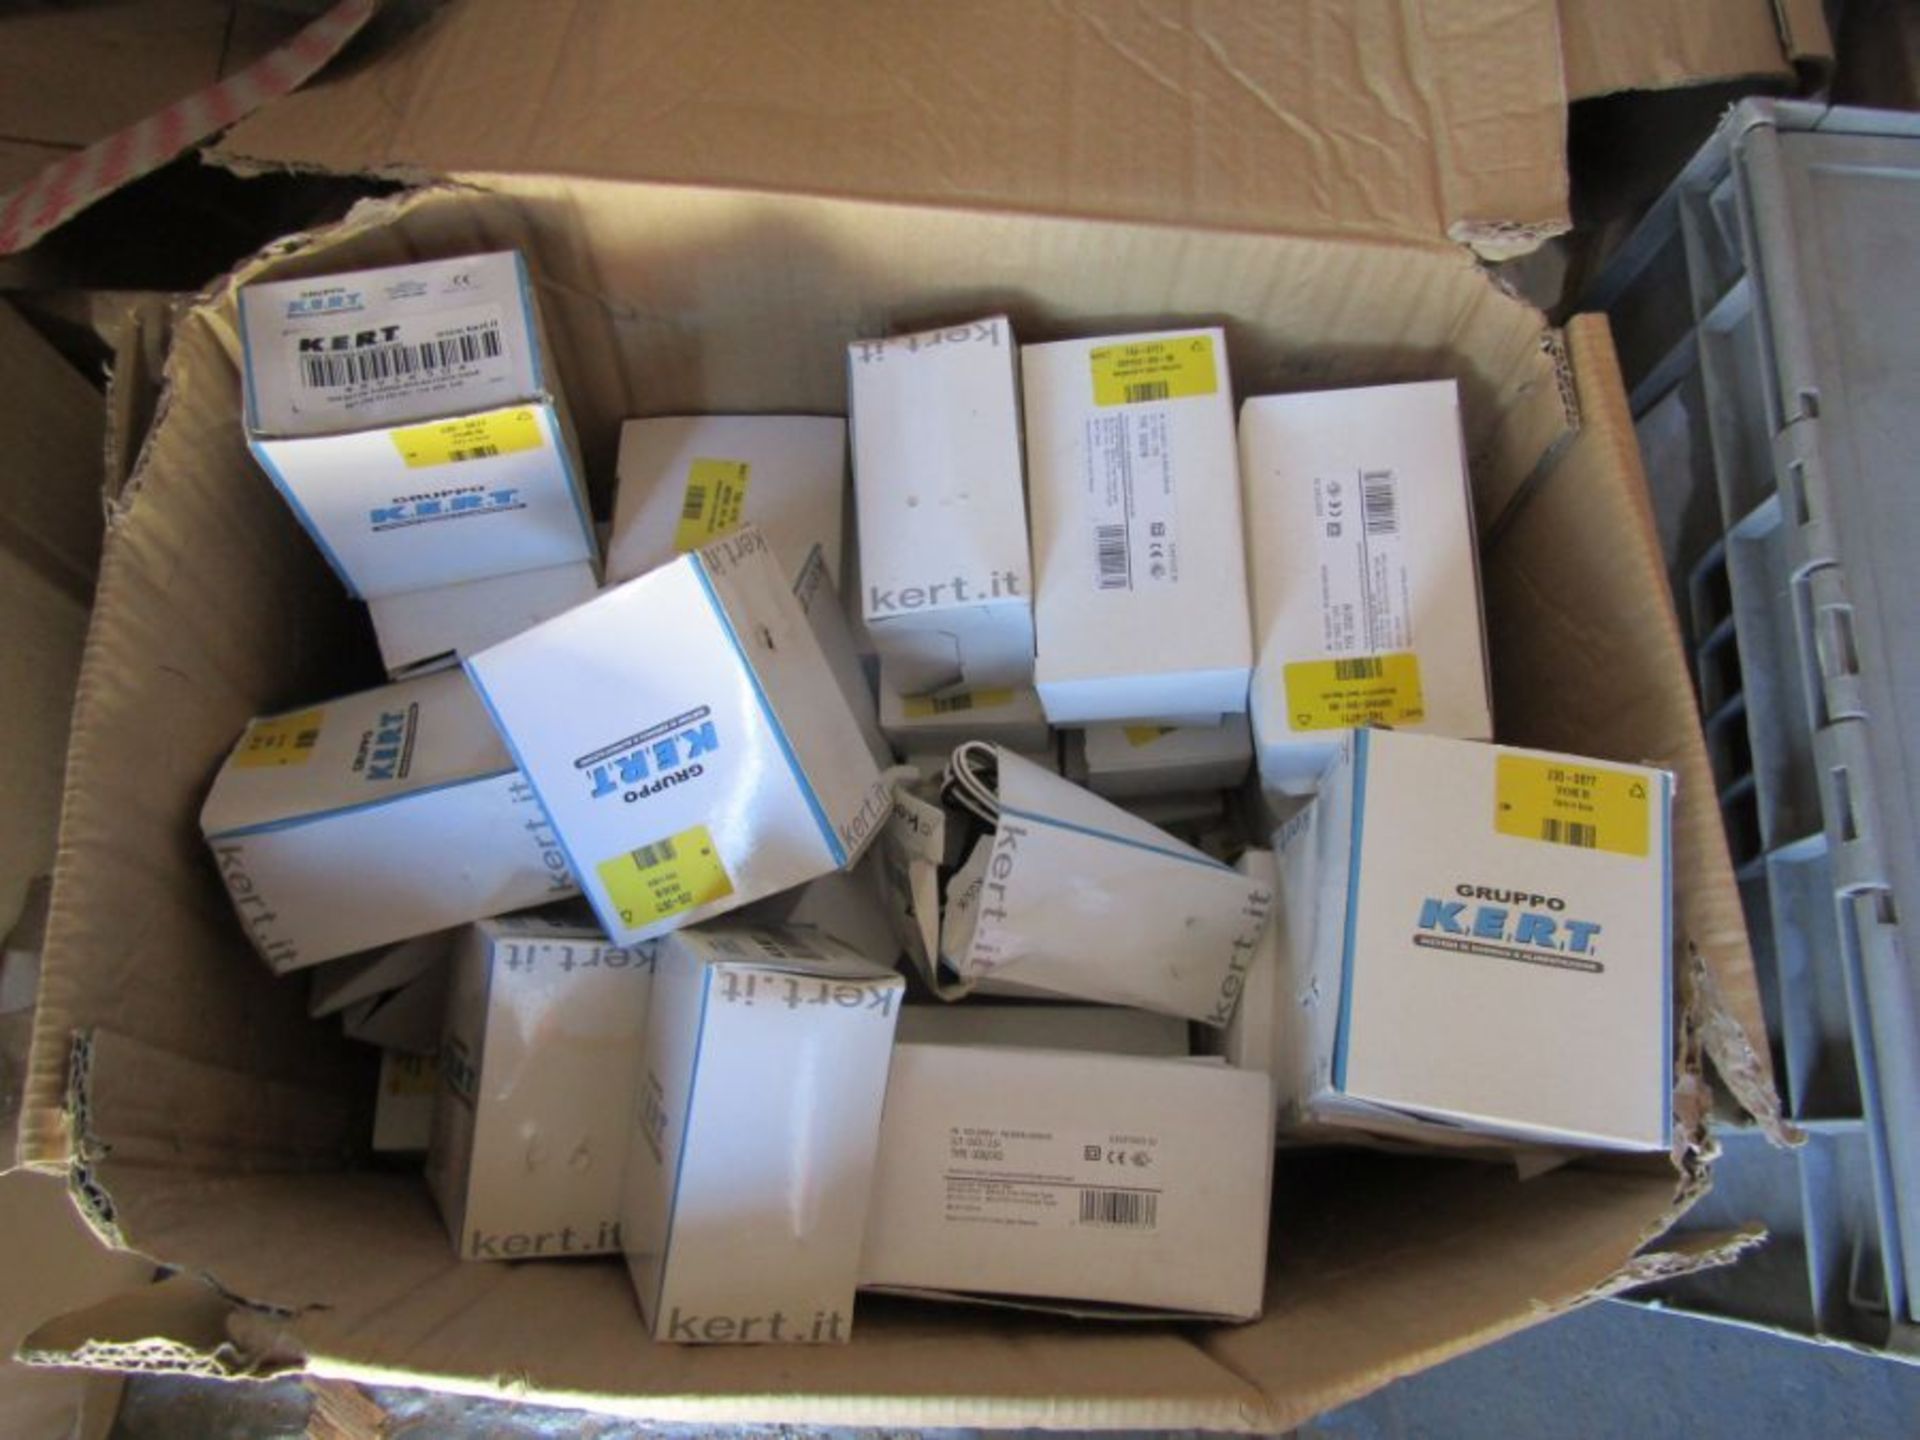 Box of around 40 Various Euro Plug Power Adaptors / Chargers - Egston and Gruppo K.E.R.T - Image 2 of 2